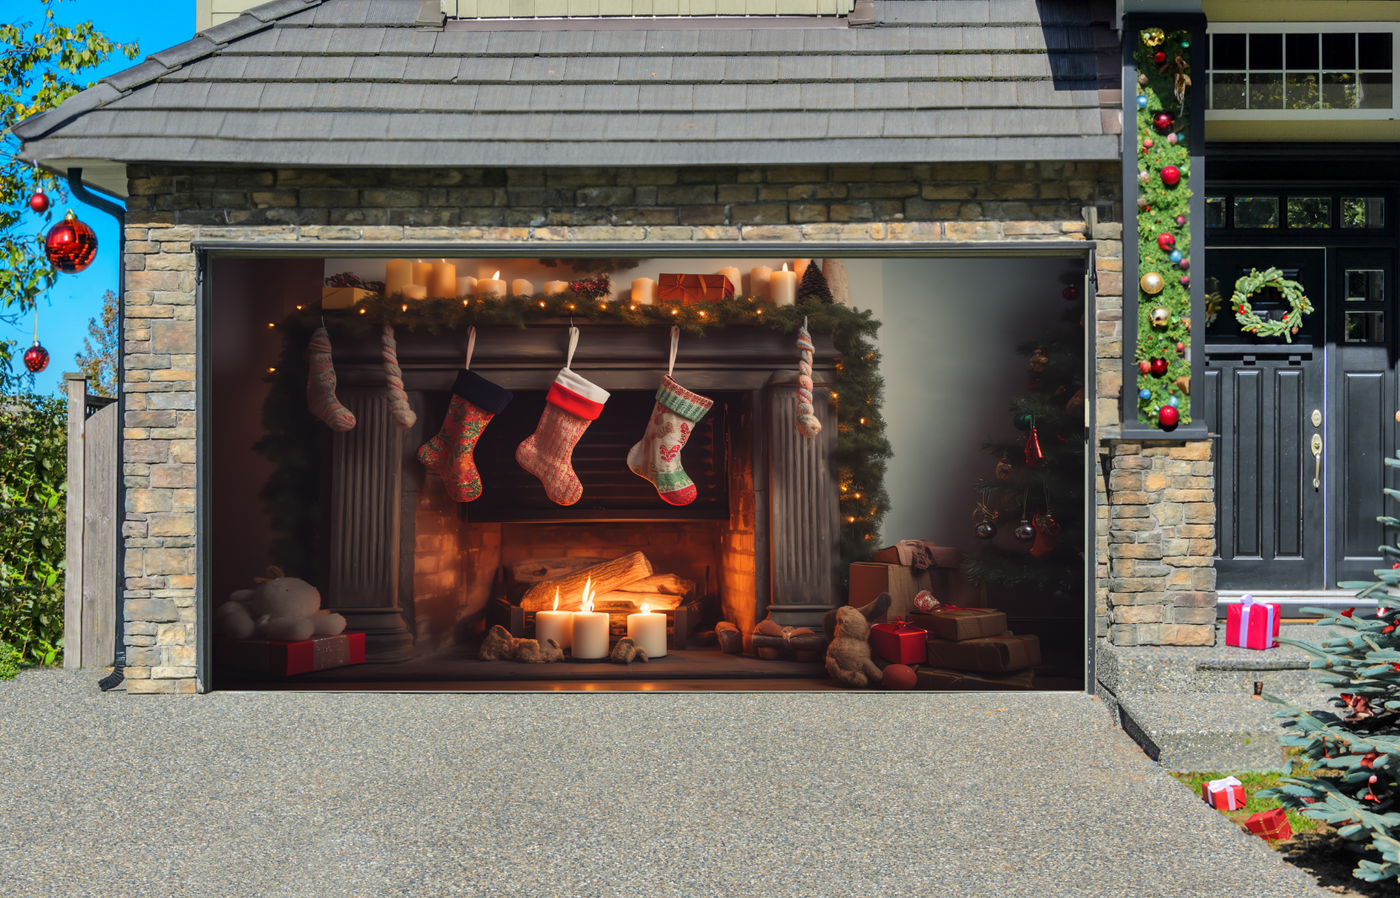 Fireplace with Christmas Decorations Garage Door Cover Wrap Backdrop Decoration